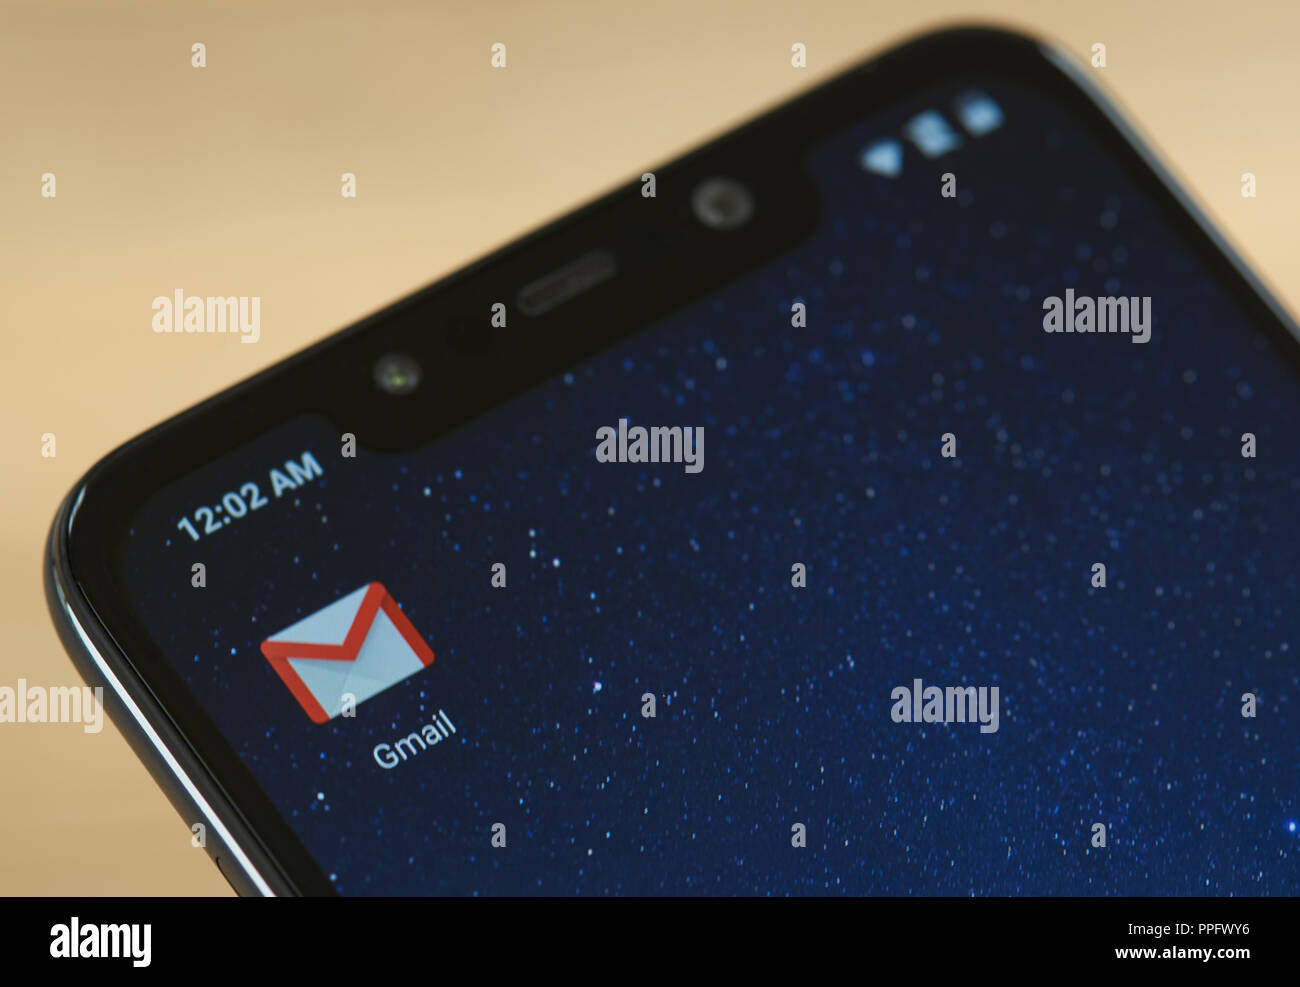 New york, USA - september 24, 2018: Gmail email logo on smartphone screen close up Stock Photo